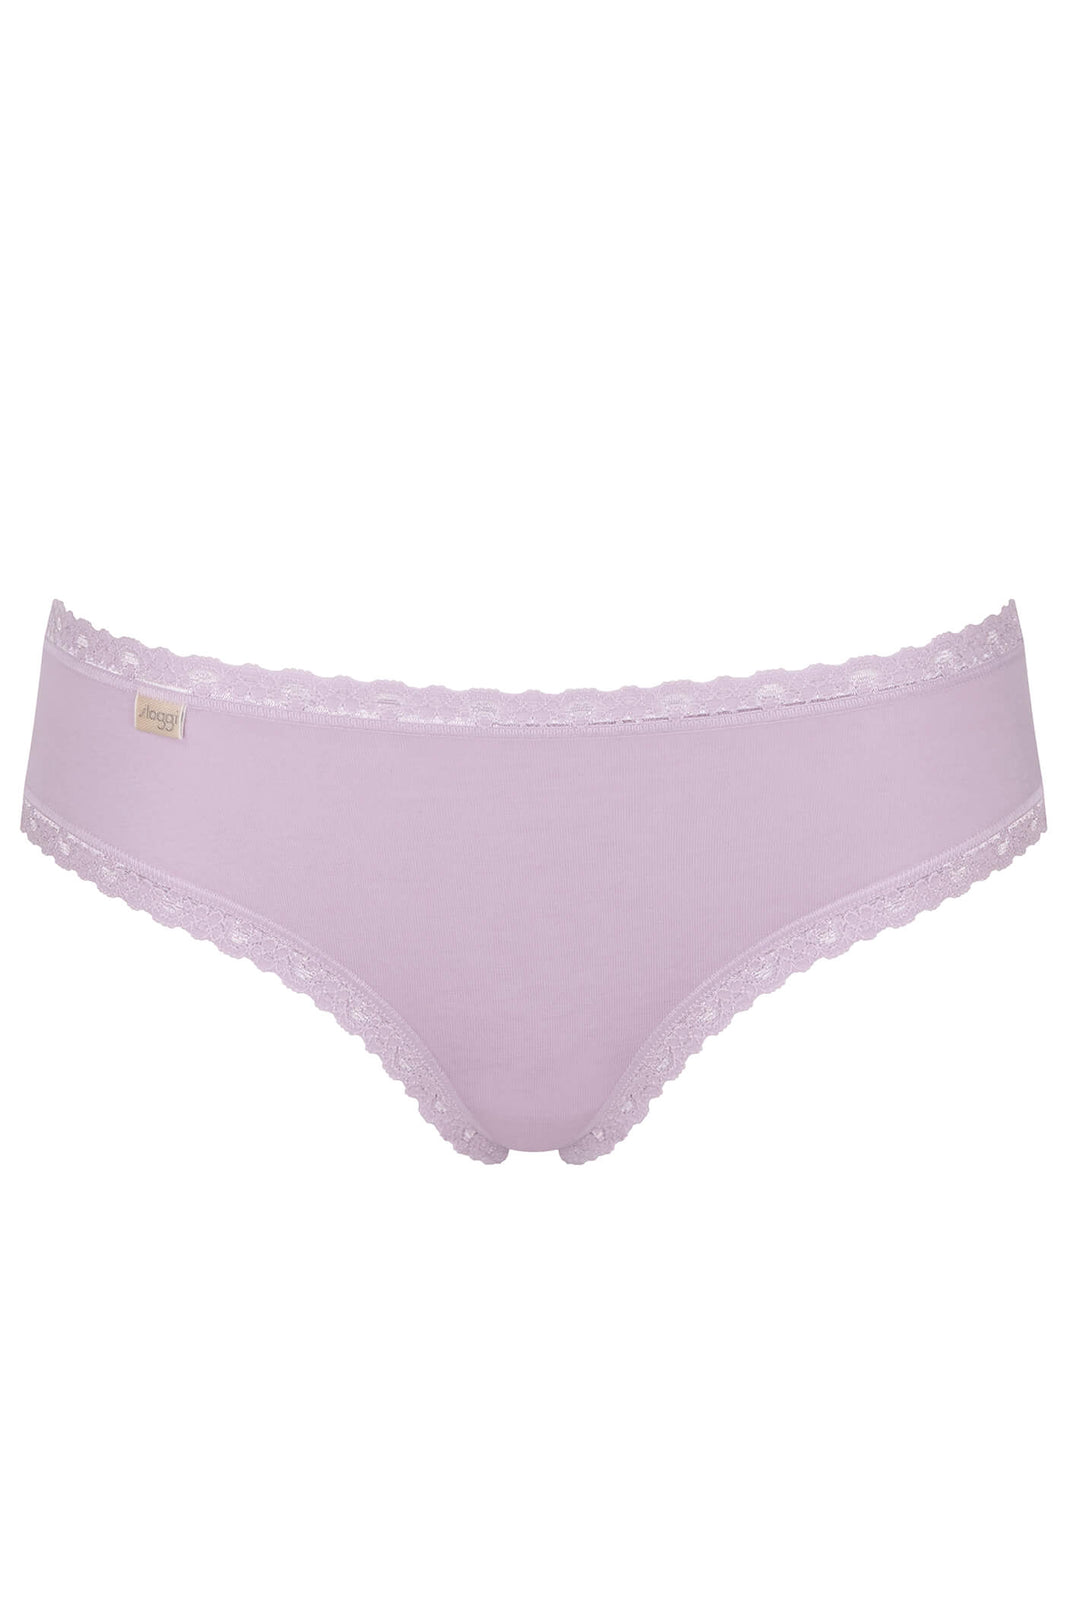 Sloggi 10198269 VOO6 Mauve Multi Colour 247 Weekend Hipster Brief 3 Pack - Shirley Allum Boutique